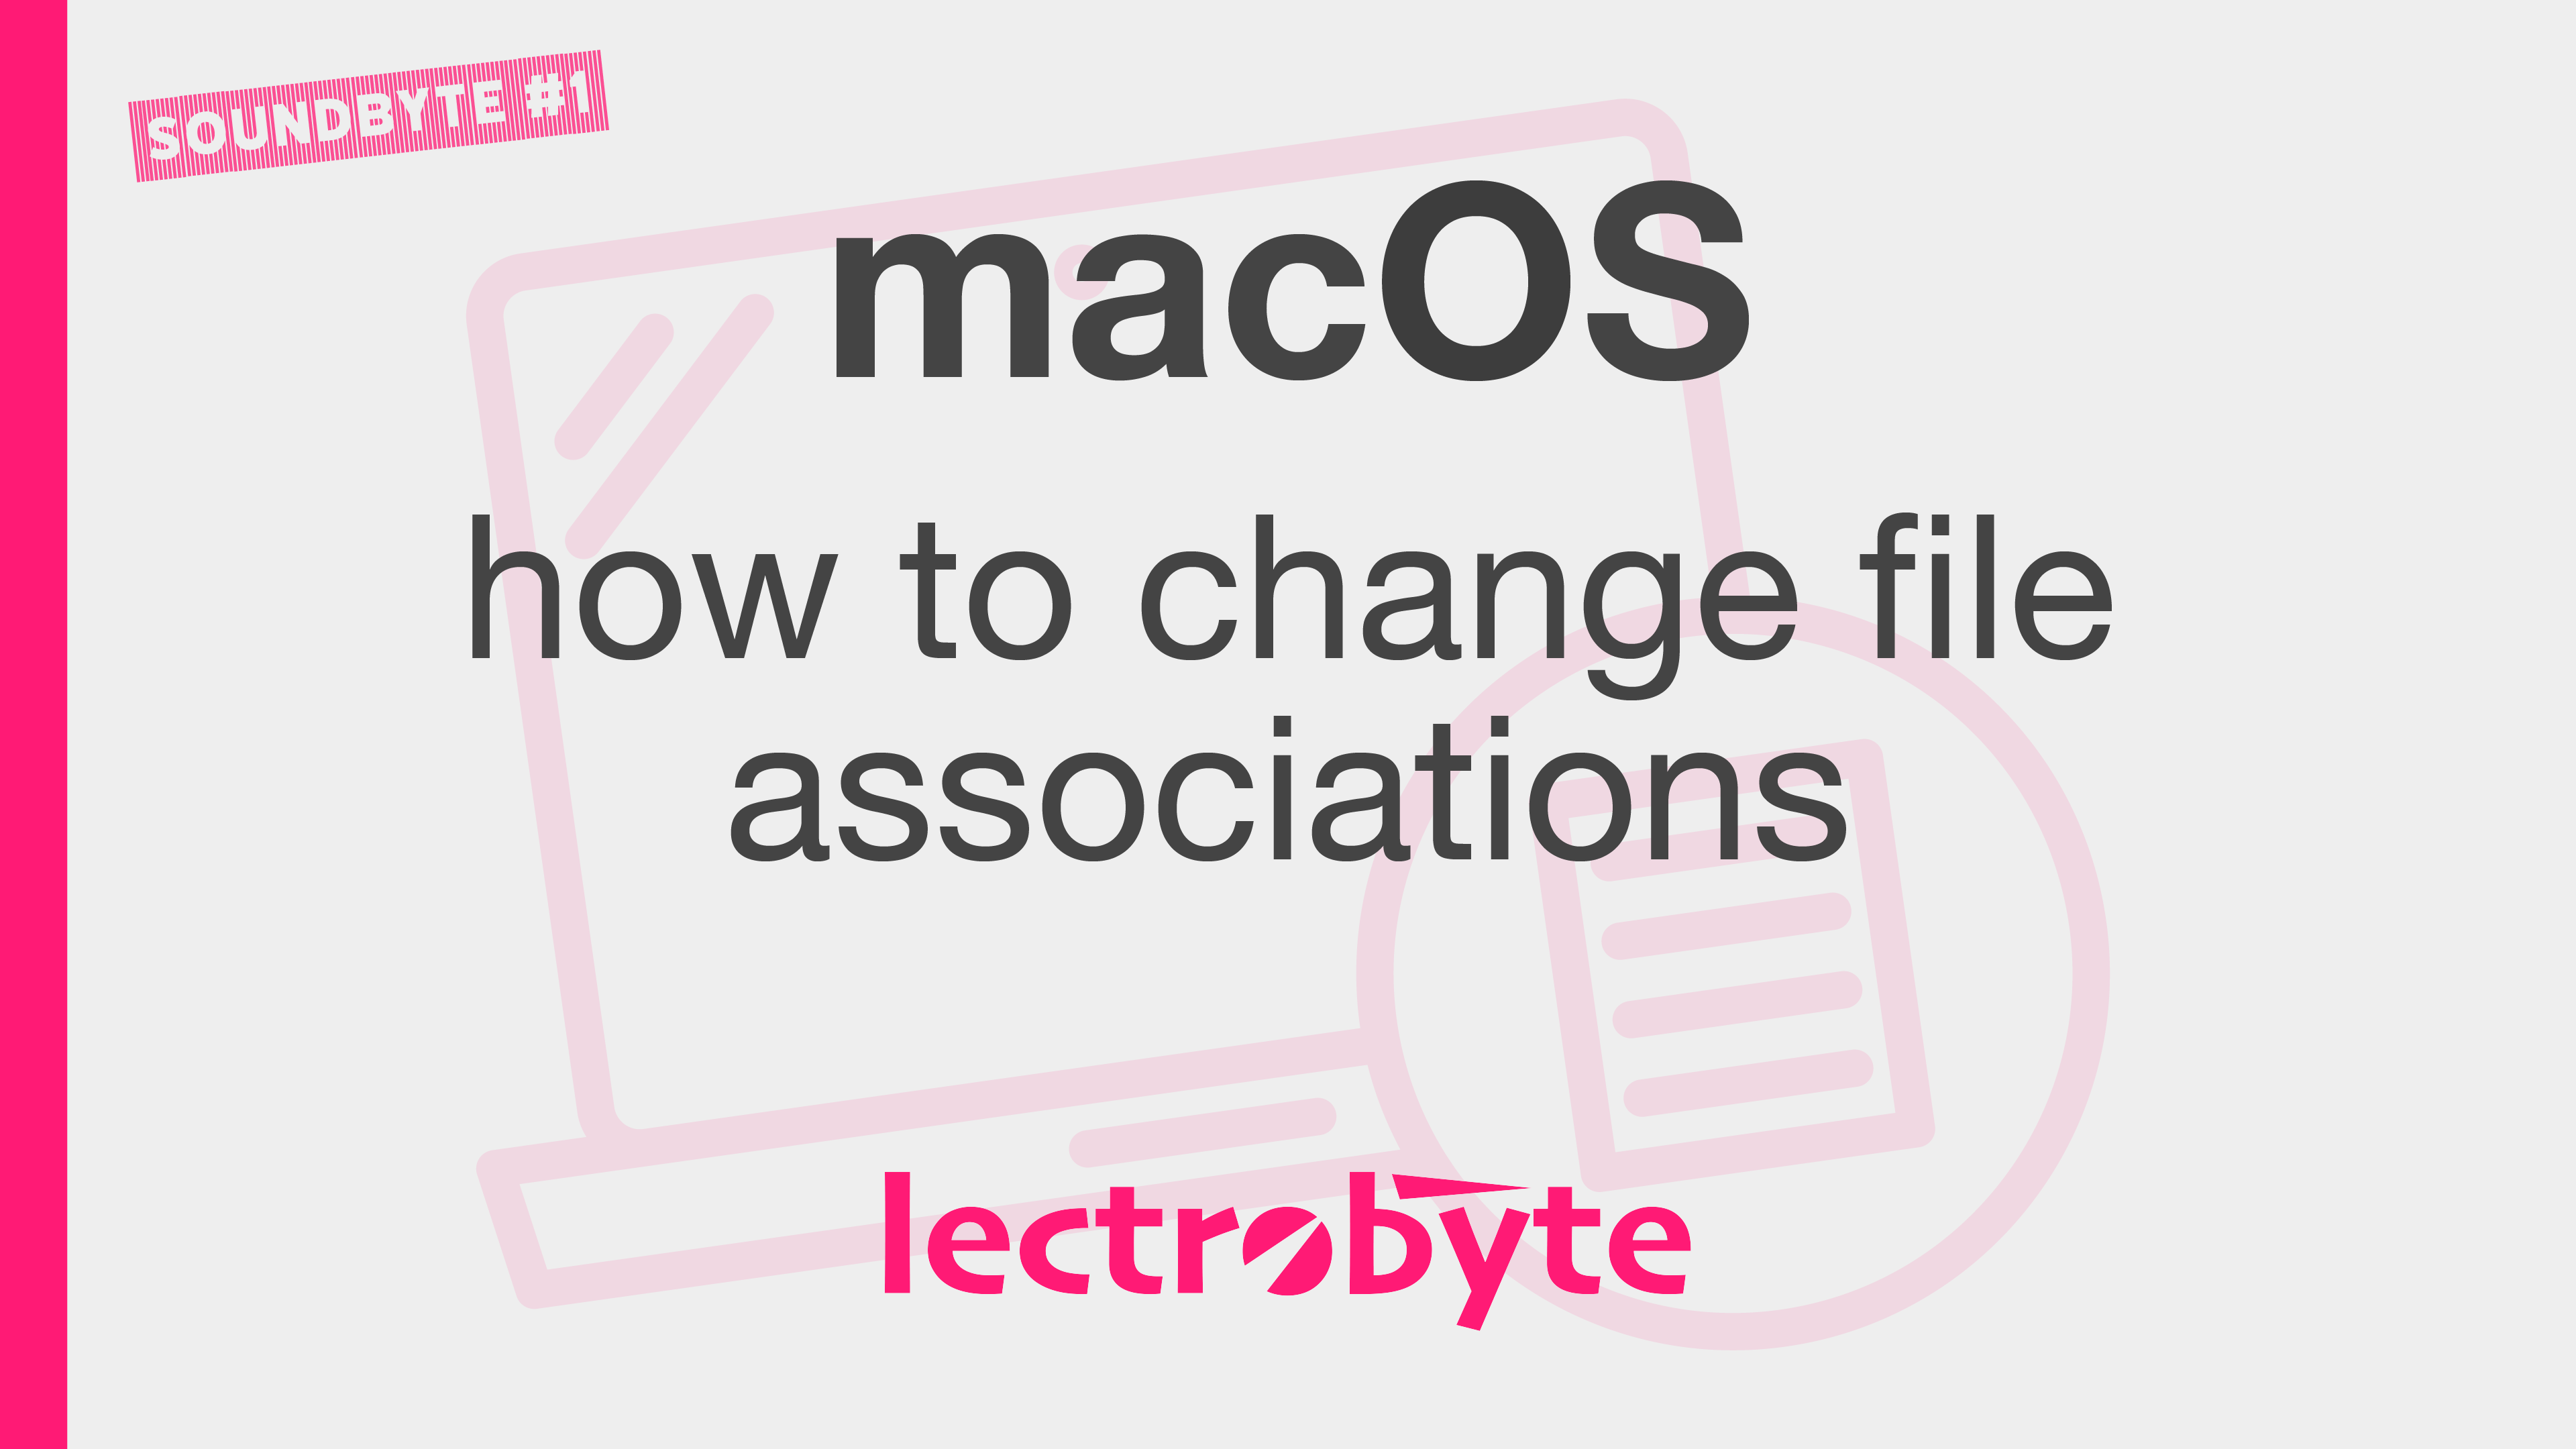 SOUNDBYTE #1 macOS How to Change File Associations artwork. Icon by Chunk Icons @ The Noun Project.